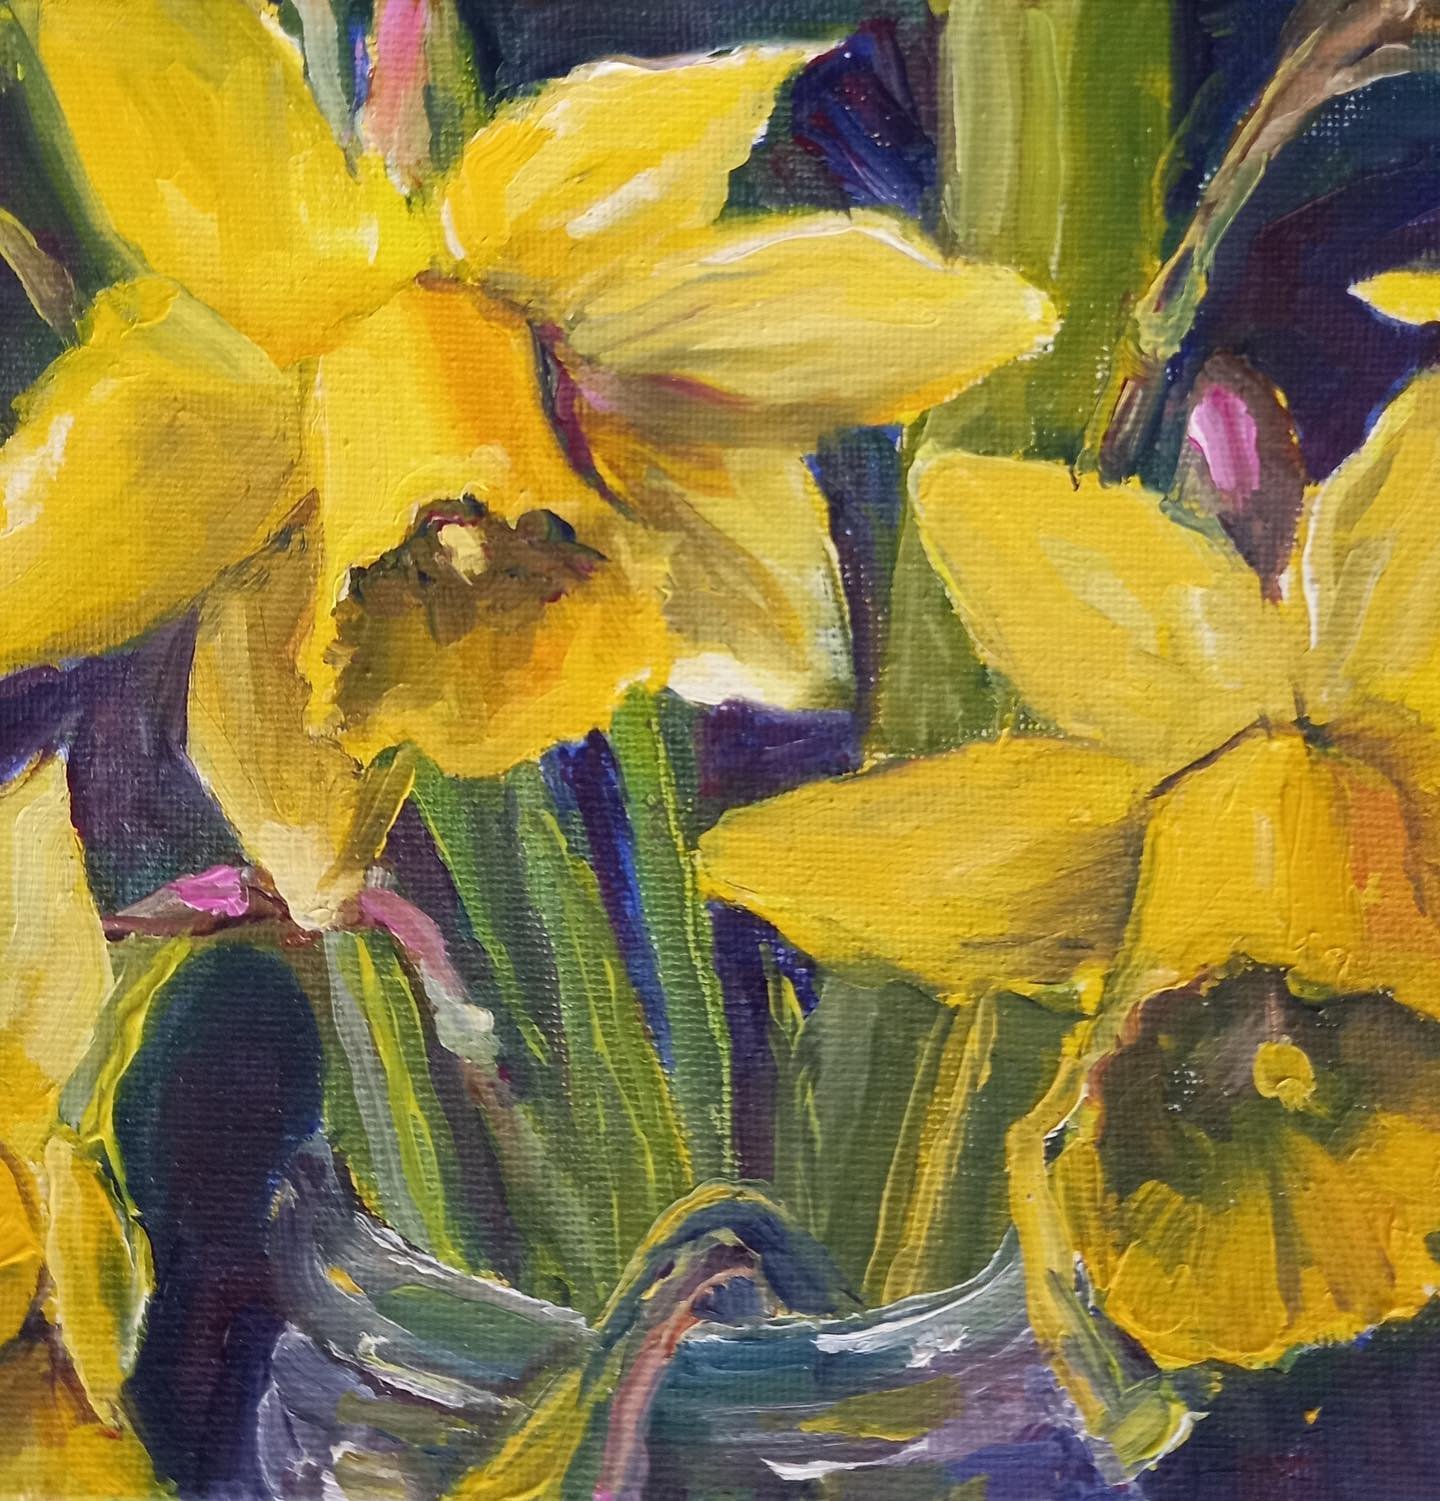 Happy St. David&rsquo;s Day!
Daffodils painted by Jantein Powell and featured in our next exhibition starting 8th March